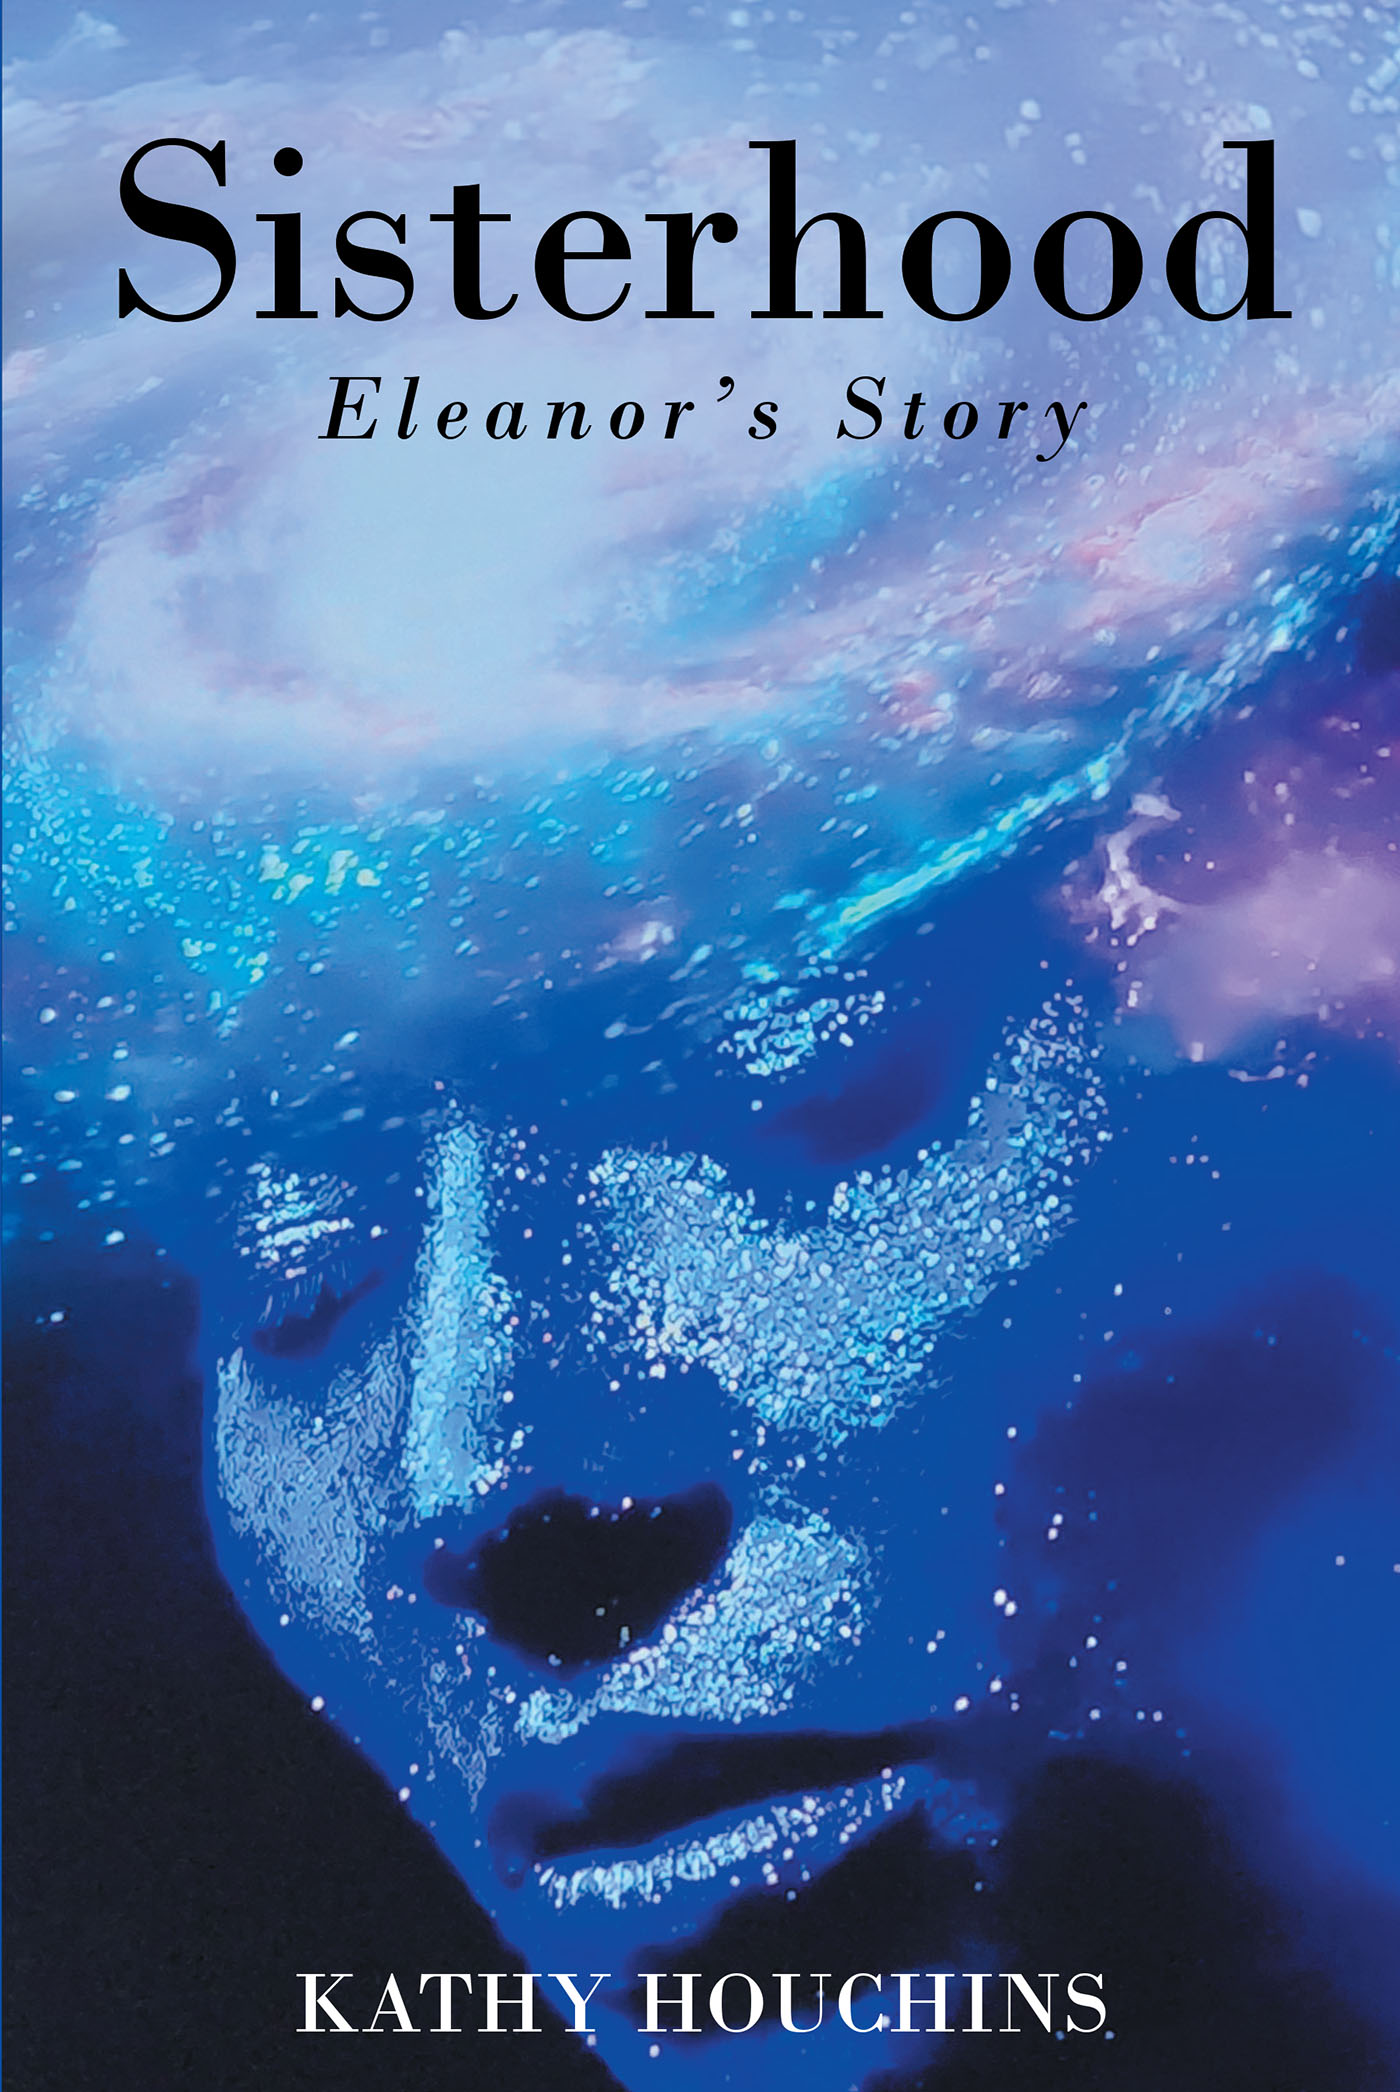 Kathy Houchins’s New Book, "Sisterhood: Eleanor's Story," Follows a Group of Women with Special Powers That They Must Use to Support Each Other & Protect Those They Love